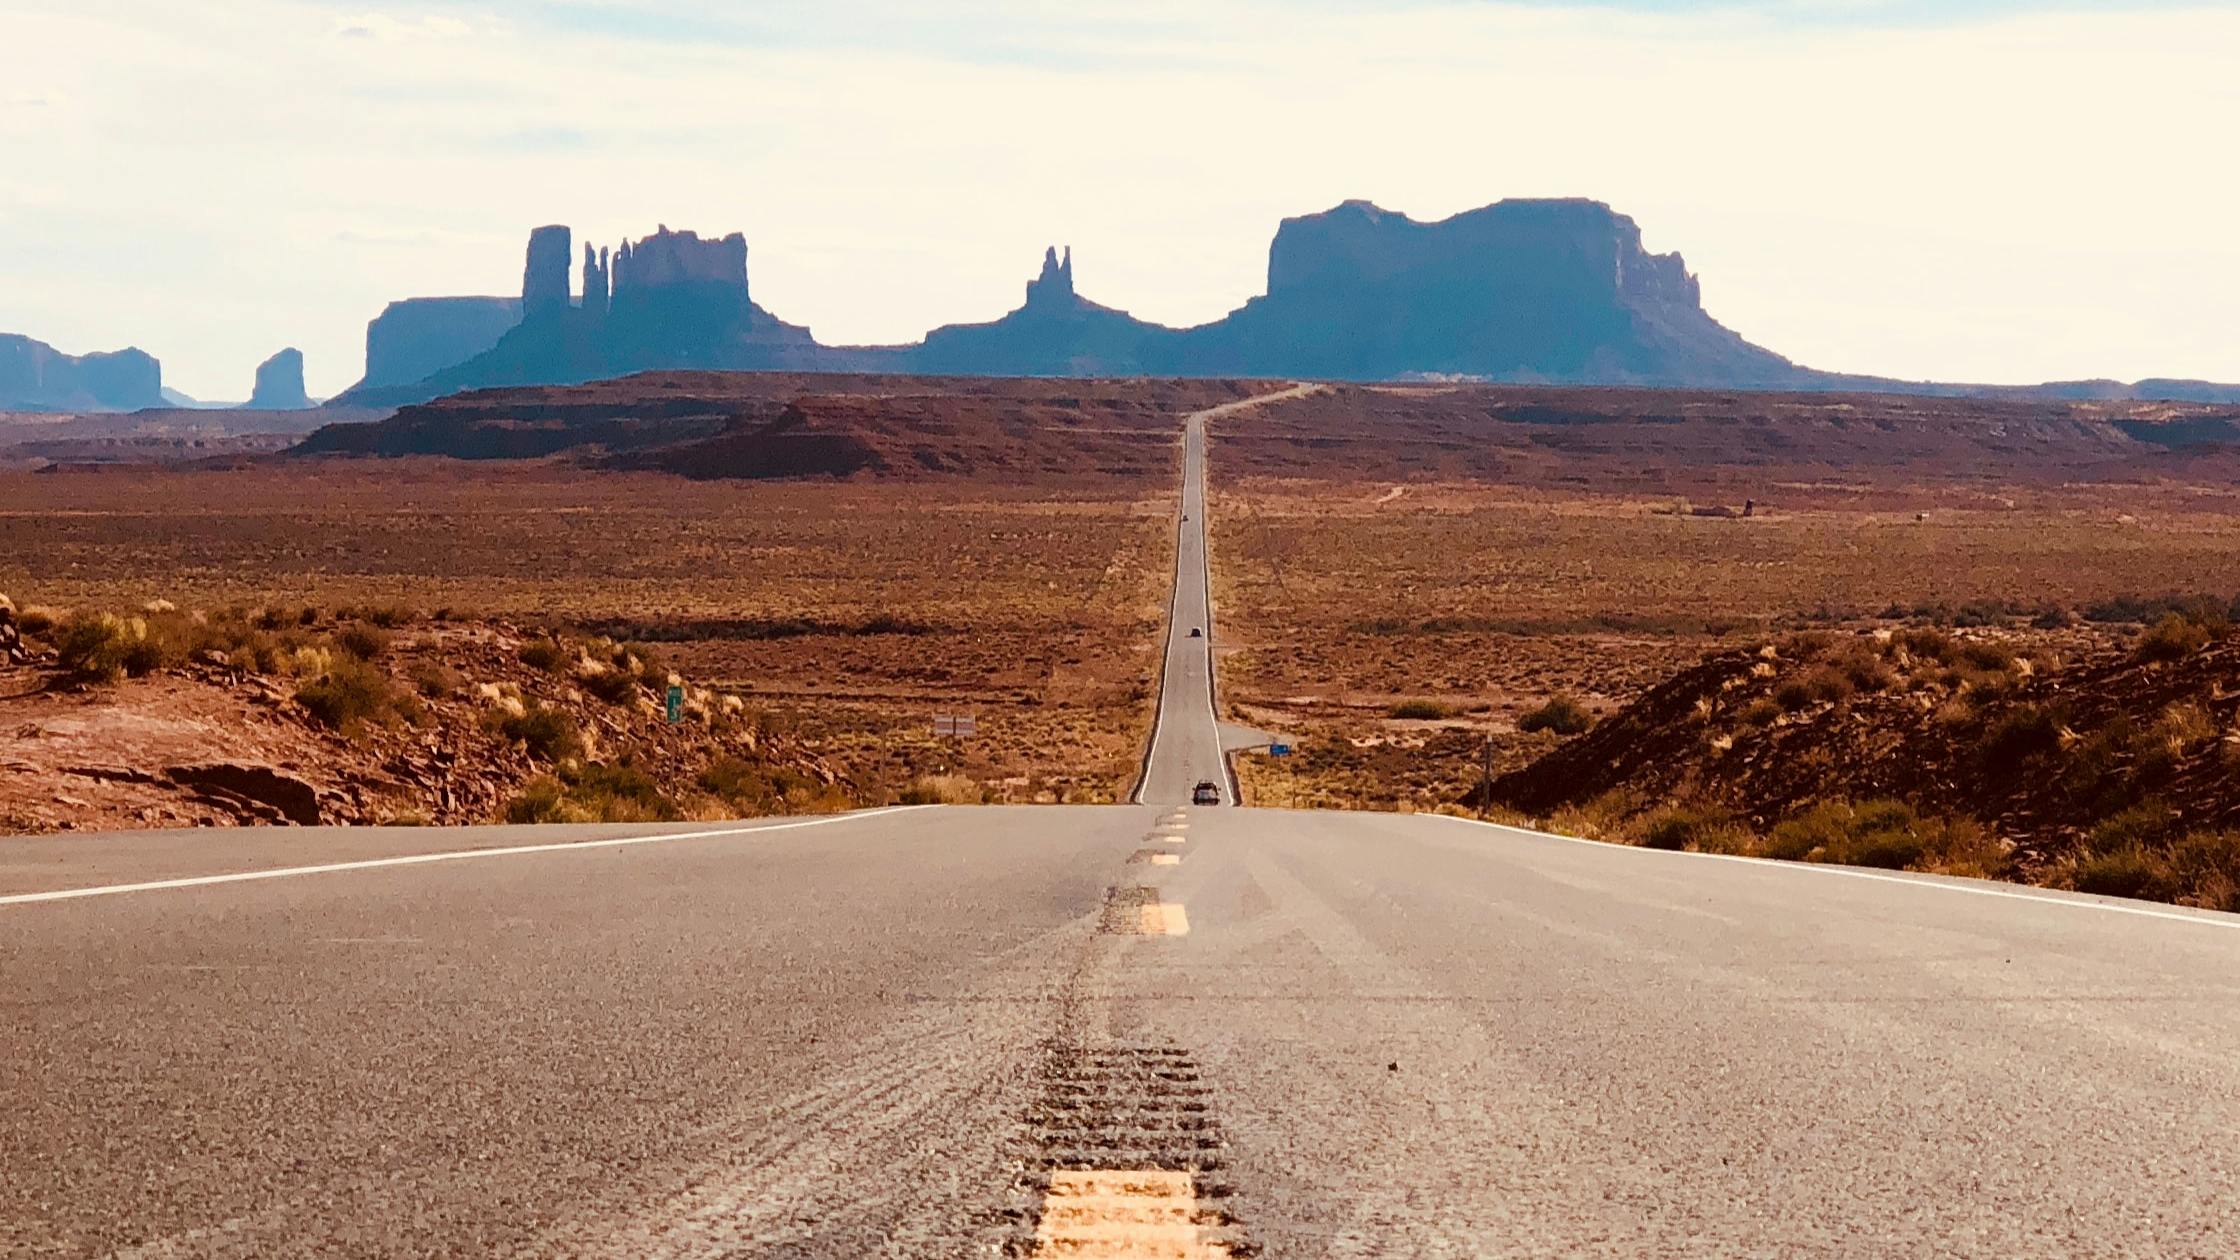 A straight road extends into the distance where buttes and mesas rise up.